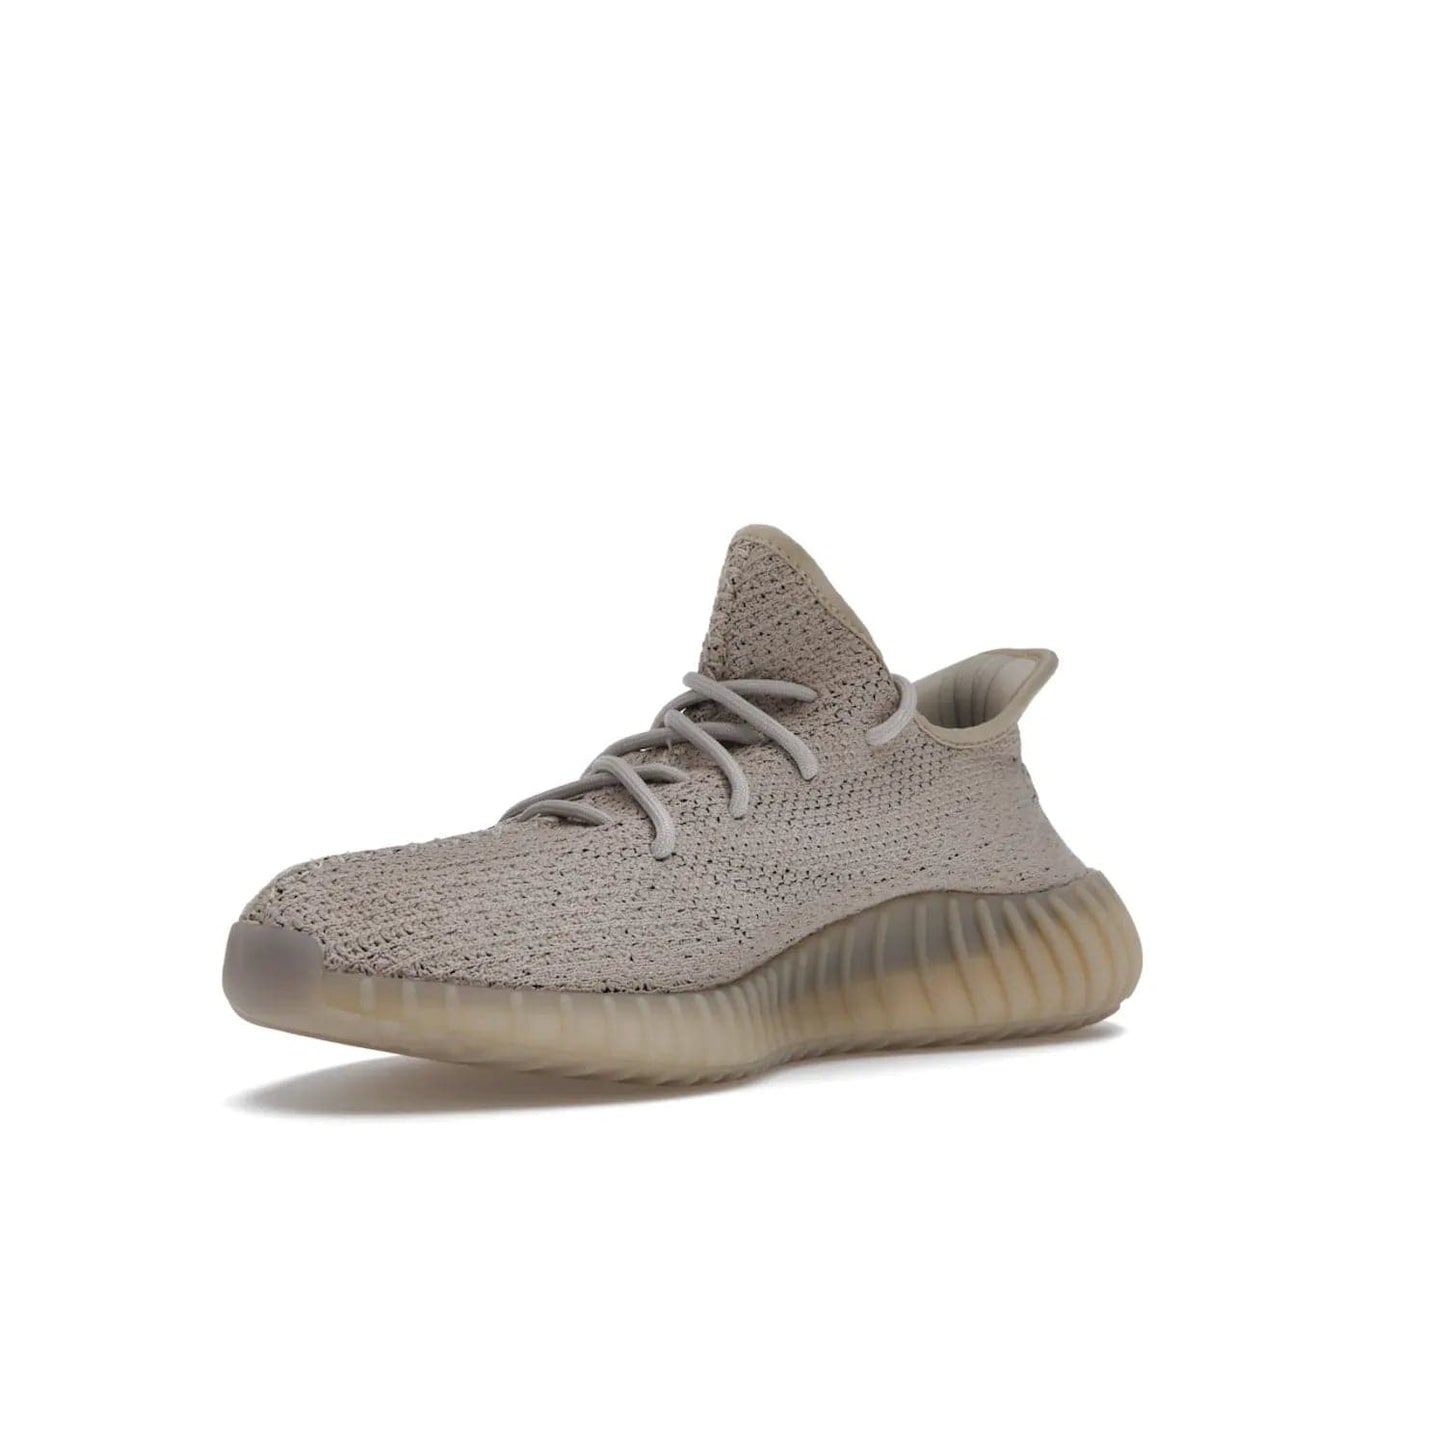 adidas Yeezy Boost 350 V2 Slate - Image 15 - Only at www.BallersClubKickz.com - Adidas Yeezy Boost 350 V2 Slate Core Black Slate featuring Primeknit upper, Boost midsole and semi-translucent TPU cage. Launched on 3/9/2022, retailed at $230.